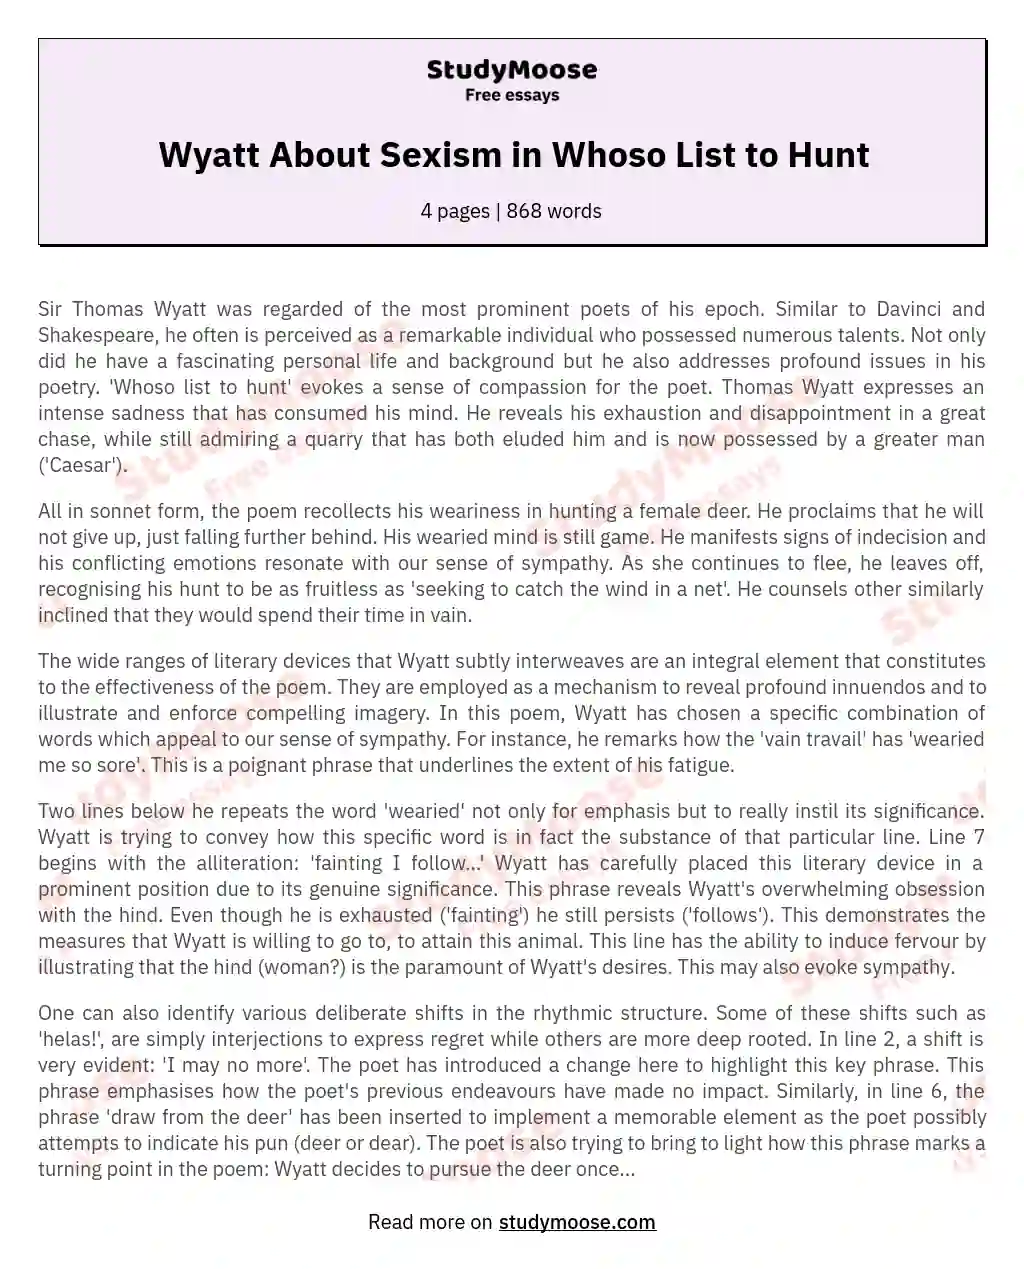 Wyatt About Sexism in Whoso List to Hunt essay